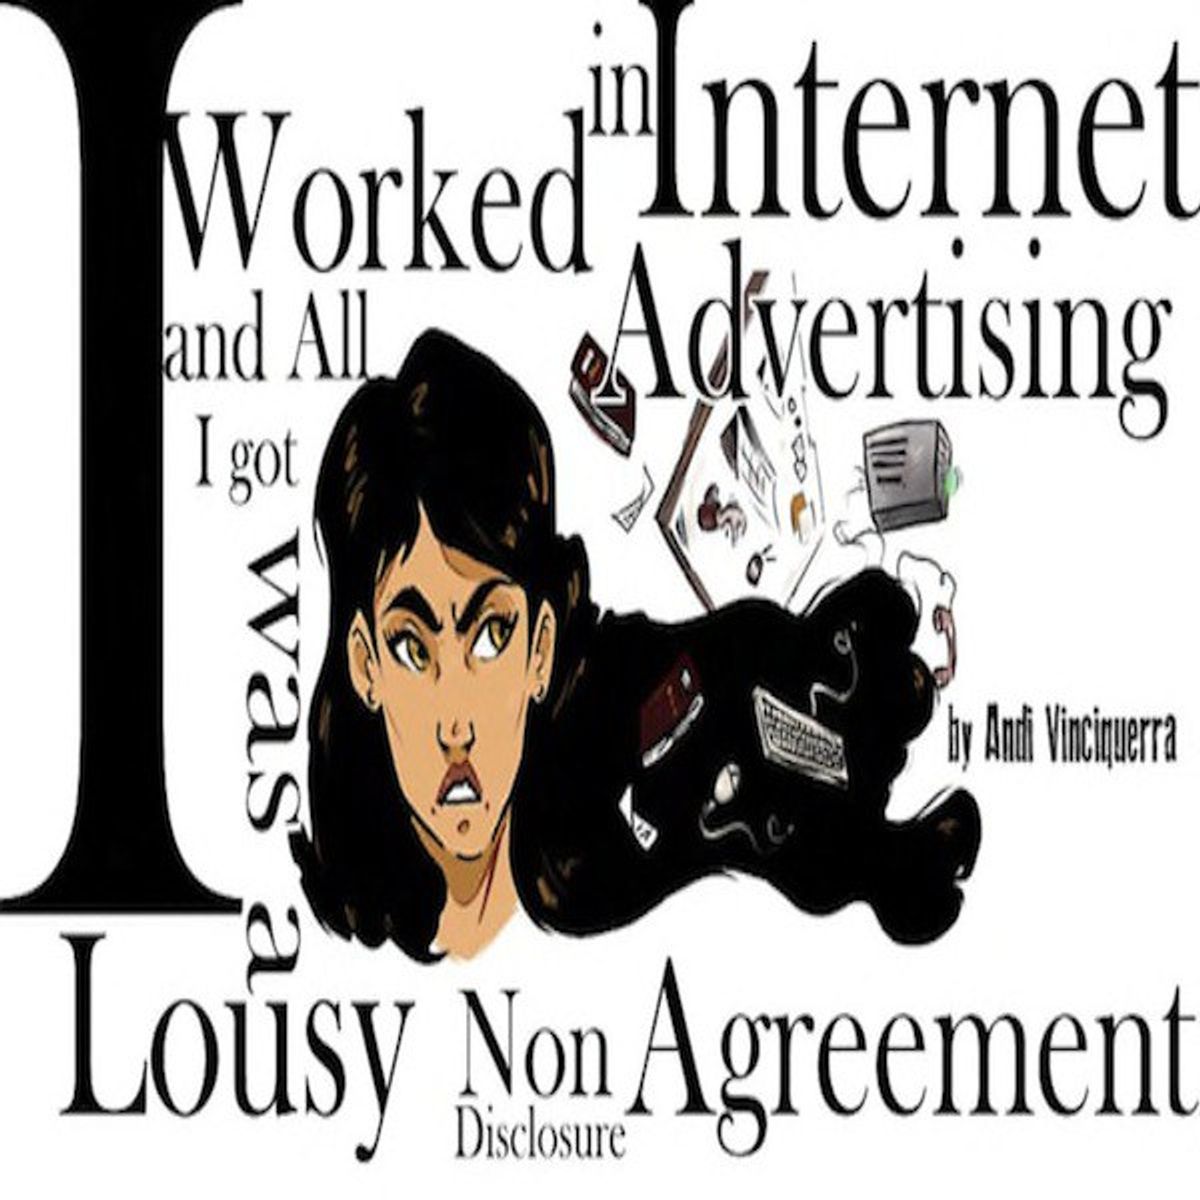 I Worked In Internet Advertising And All I Got Was A Lousy Non Discloser Agreement